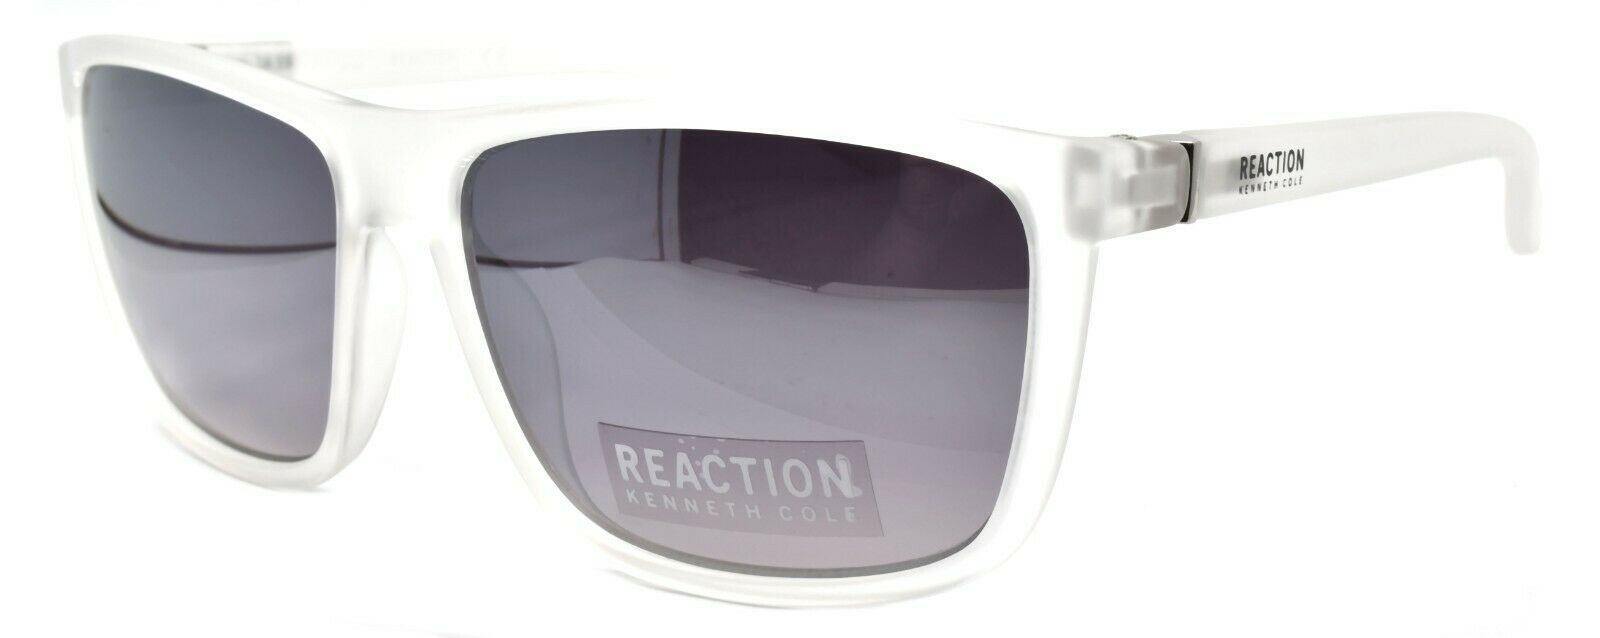 1-Kenneth Cole Reaction KC1317 27C Men's Sunglasses 59-15-140 Crystal / Mirrored-664689987771-IKSpecs